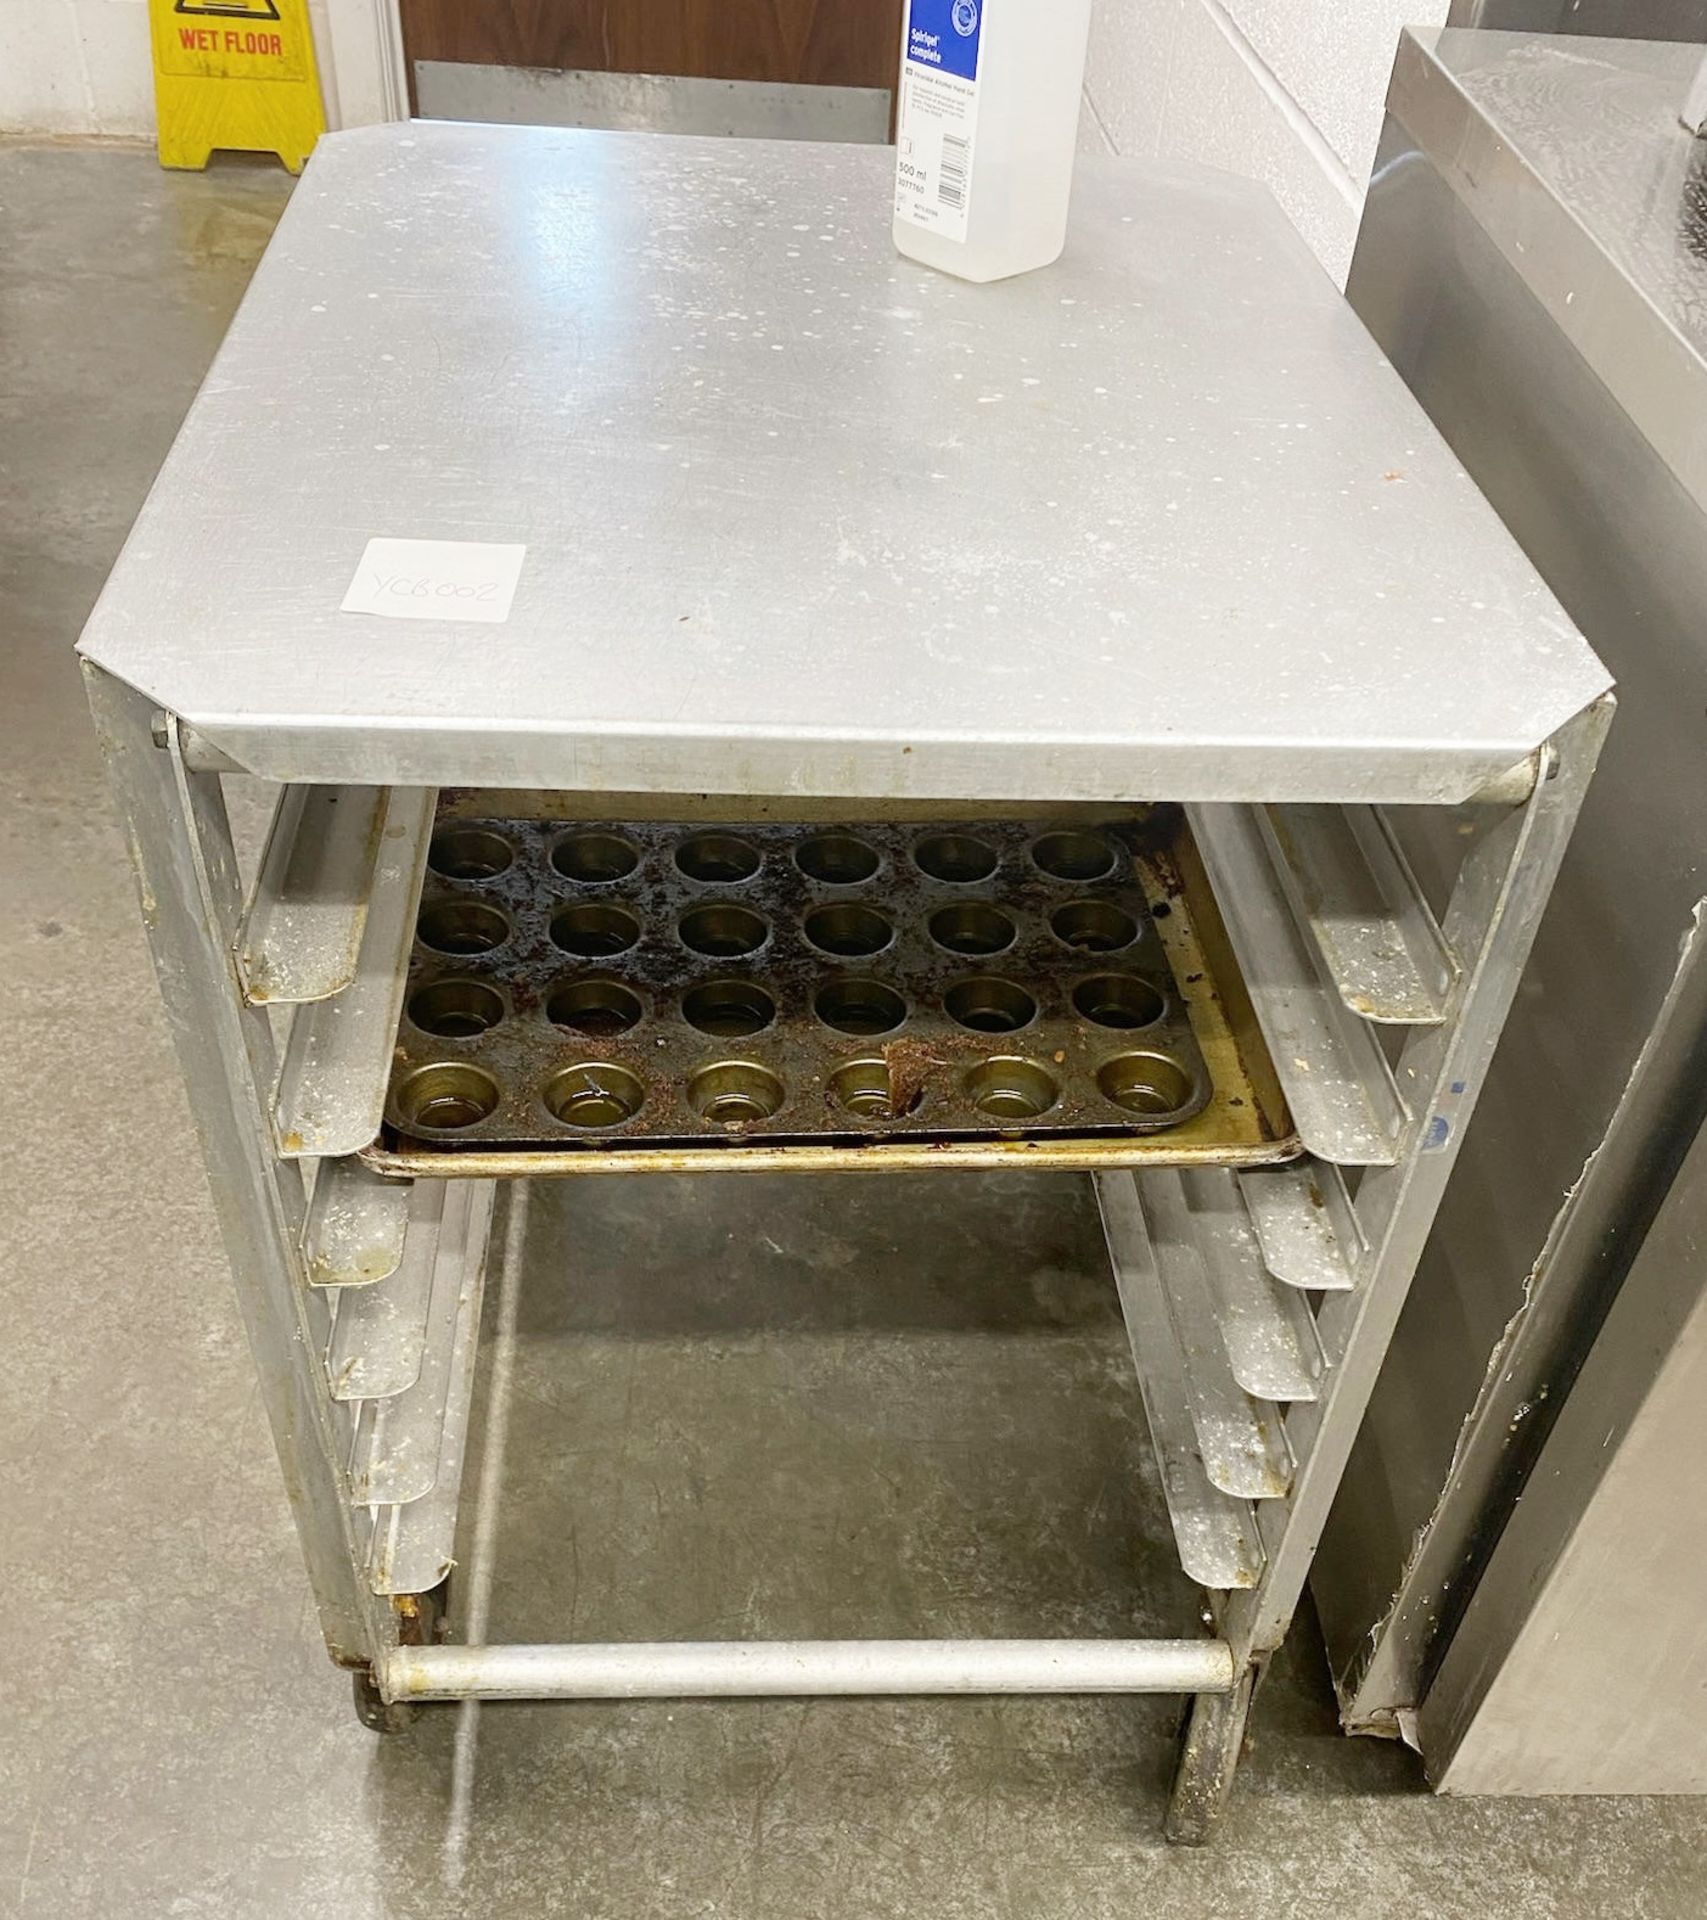 1 x Rockwood 6 Tier Trolley For Baking Trays - Stainless Steel Finish - Image 2 of 3